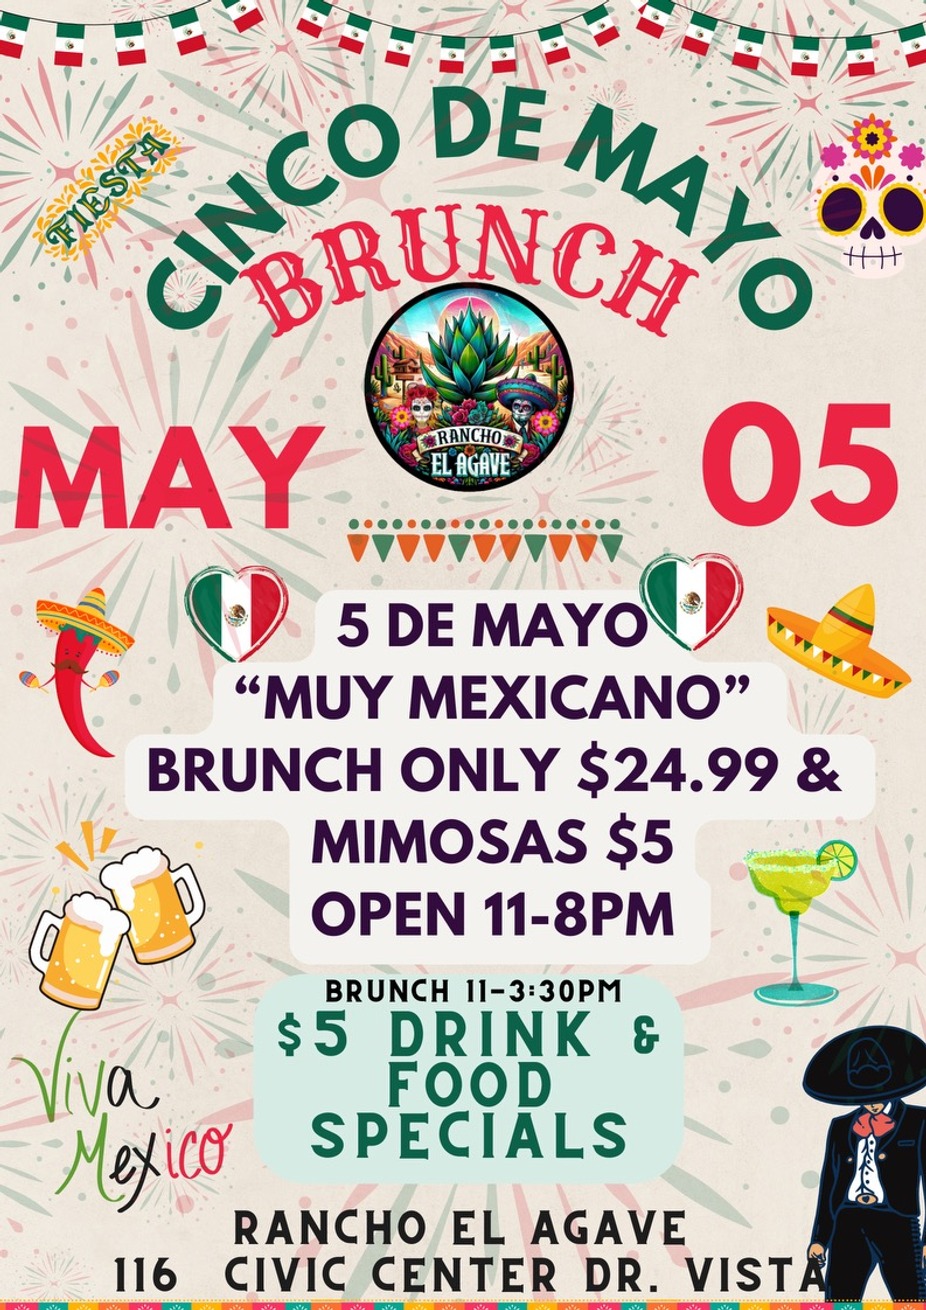 Celebrate Cinco de Mayo with authentic flair at Rancho el Agave! BRUNCH $24.99 & $5  DRINK SPECIALS all day! event photo